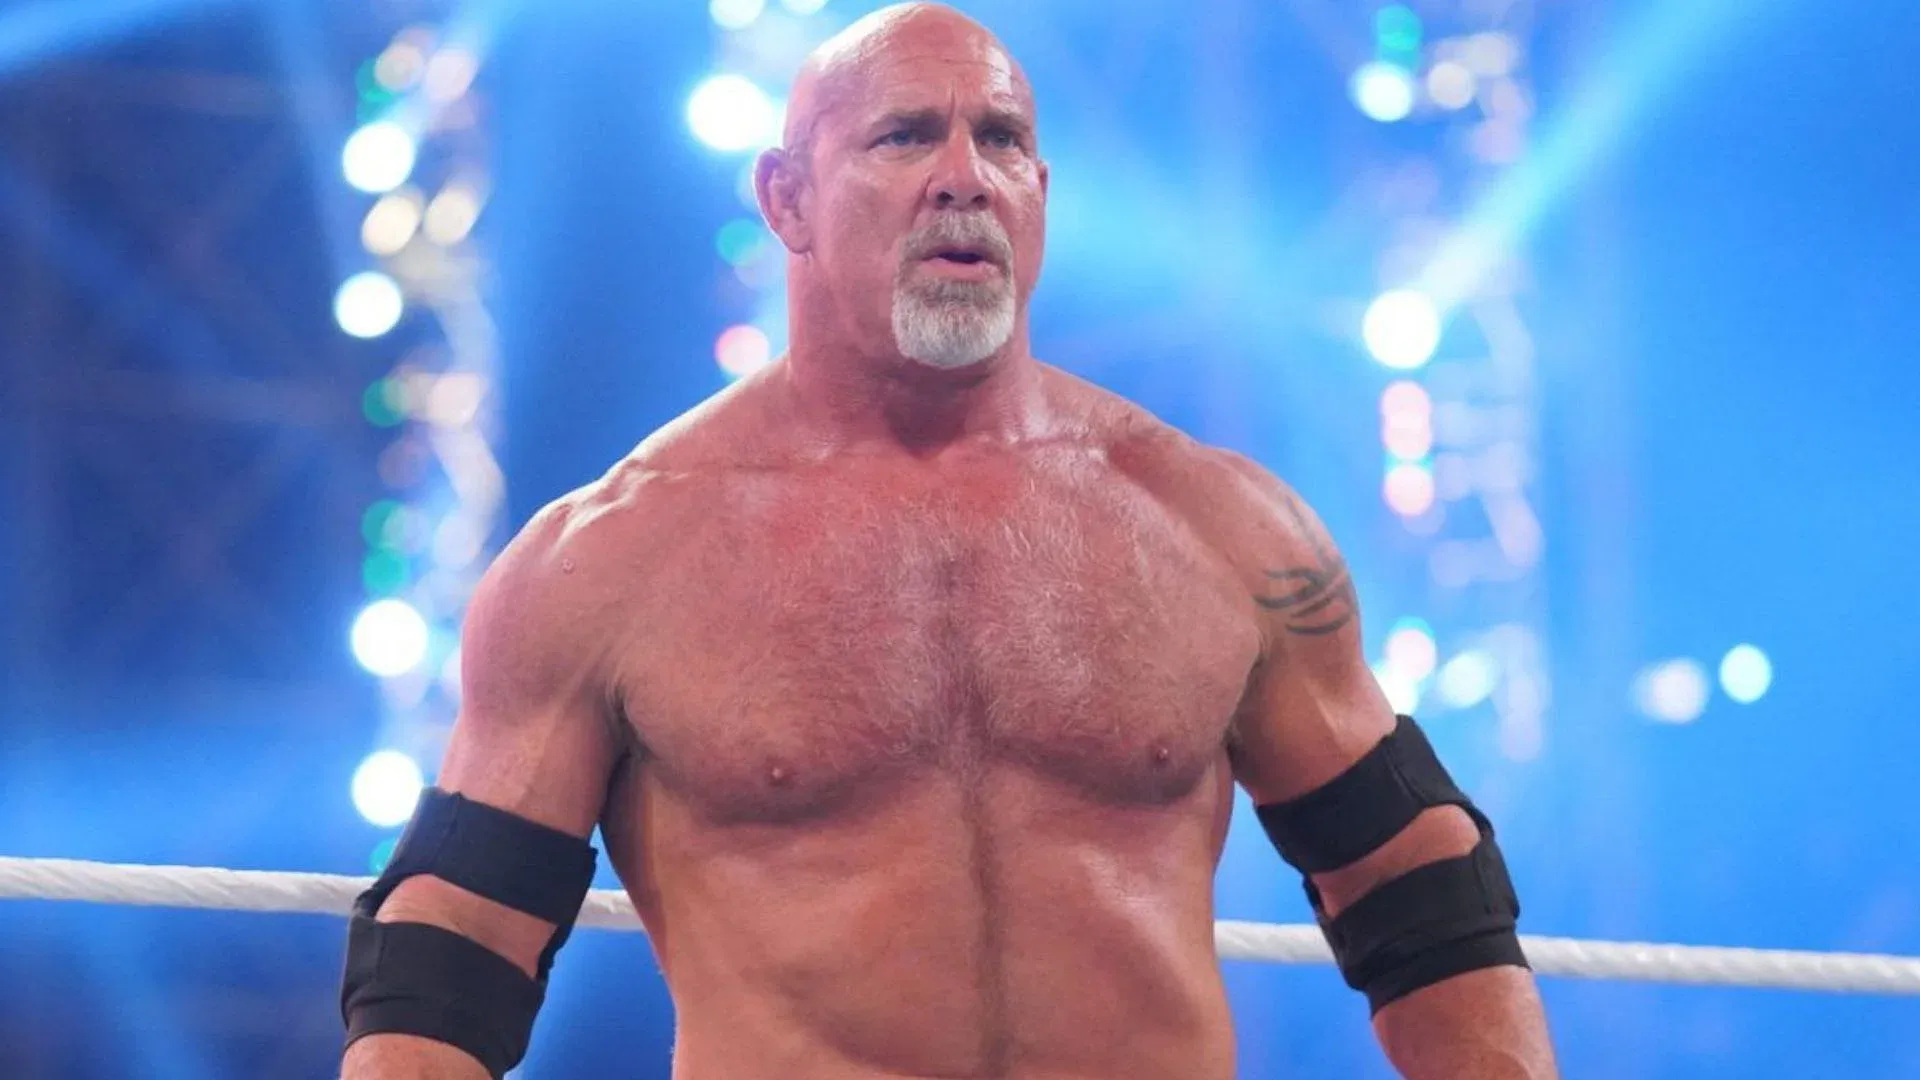 Goldberg is still under contract with WWE